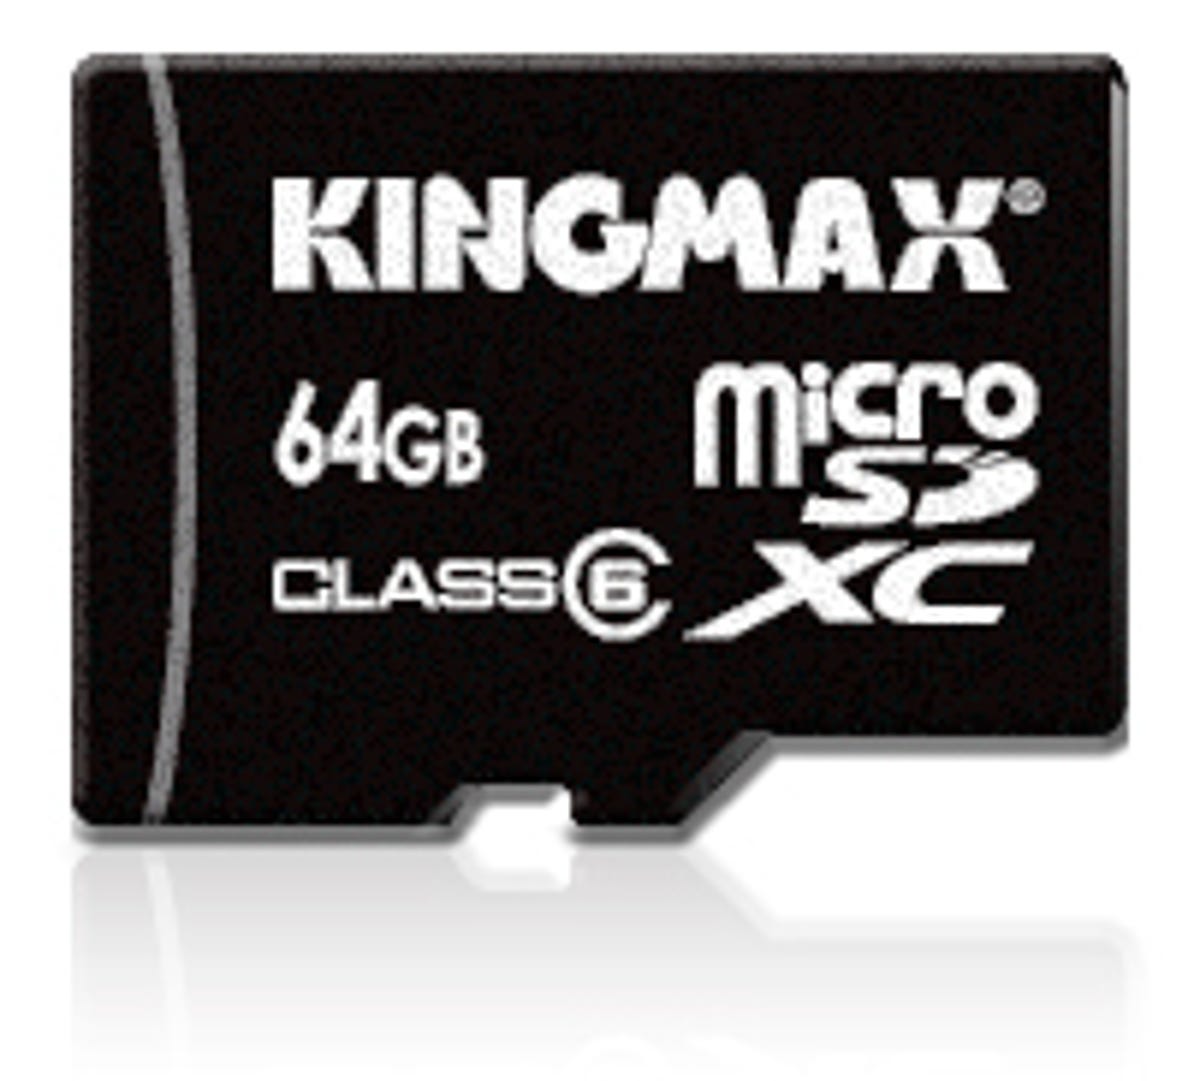 A blown-up picture of Kingmax's first 64GB microSD card.